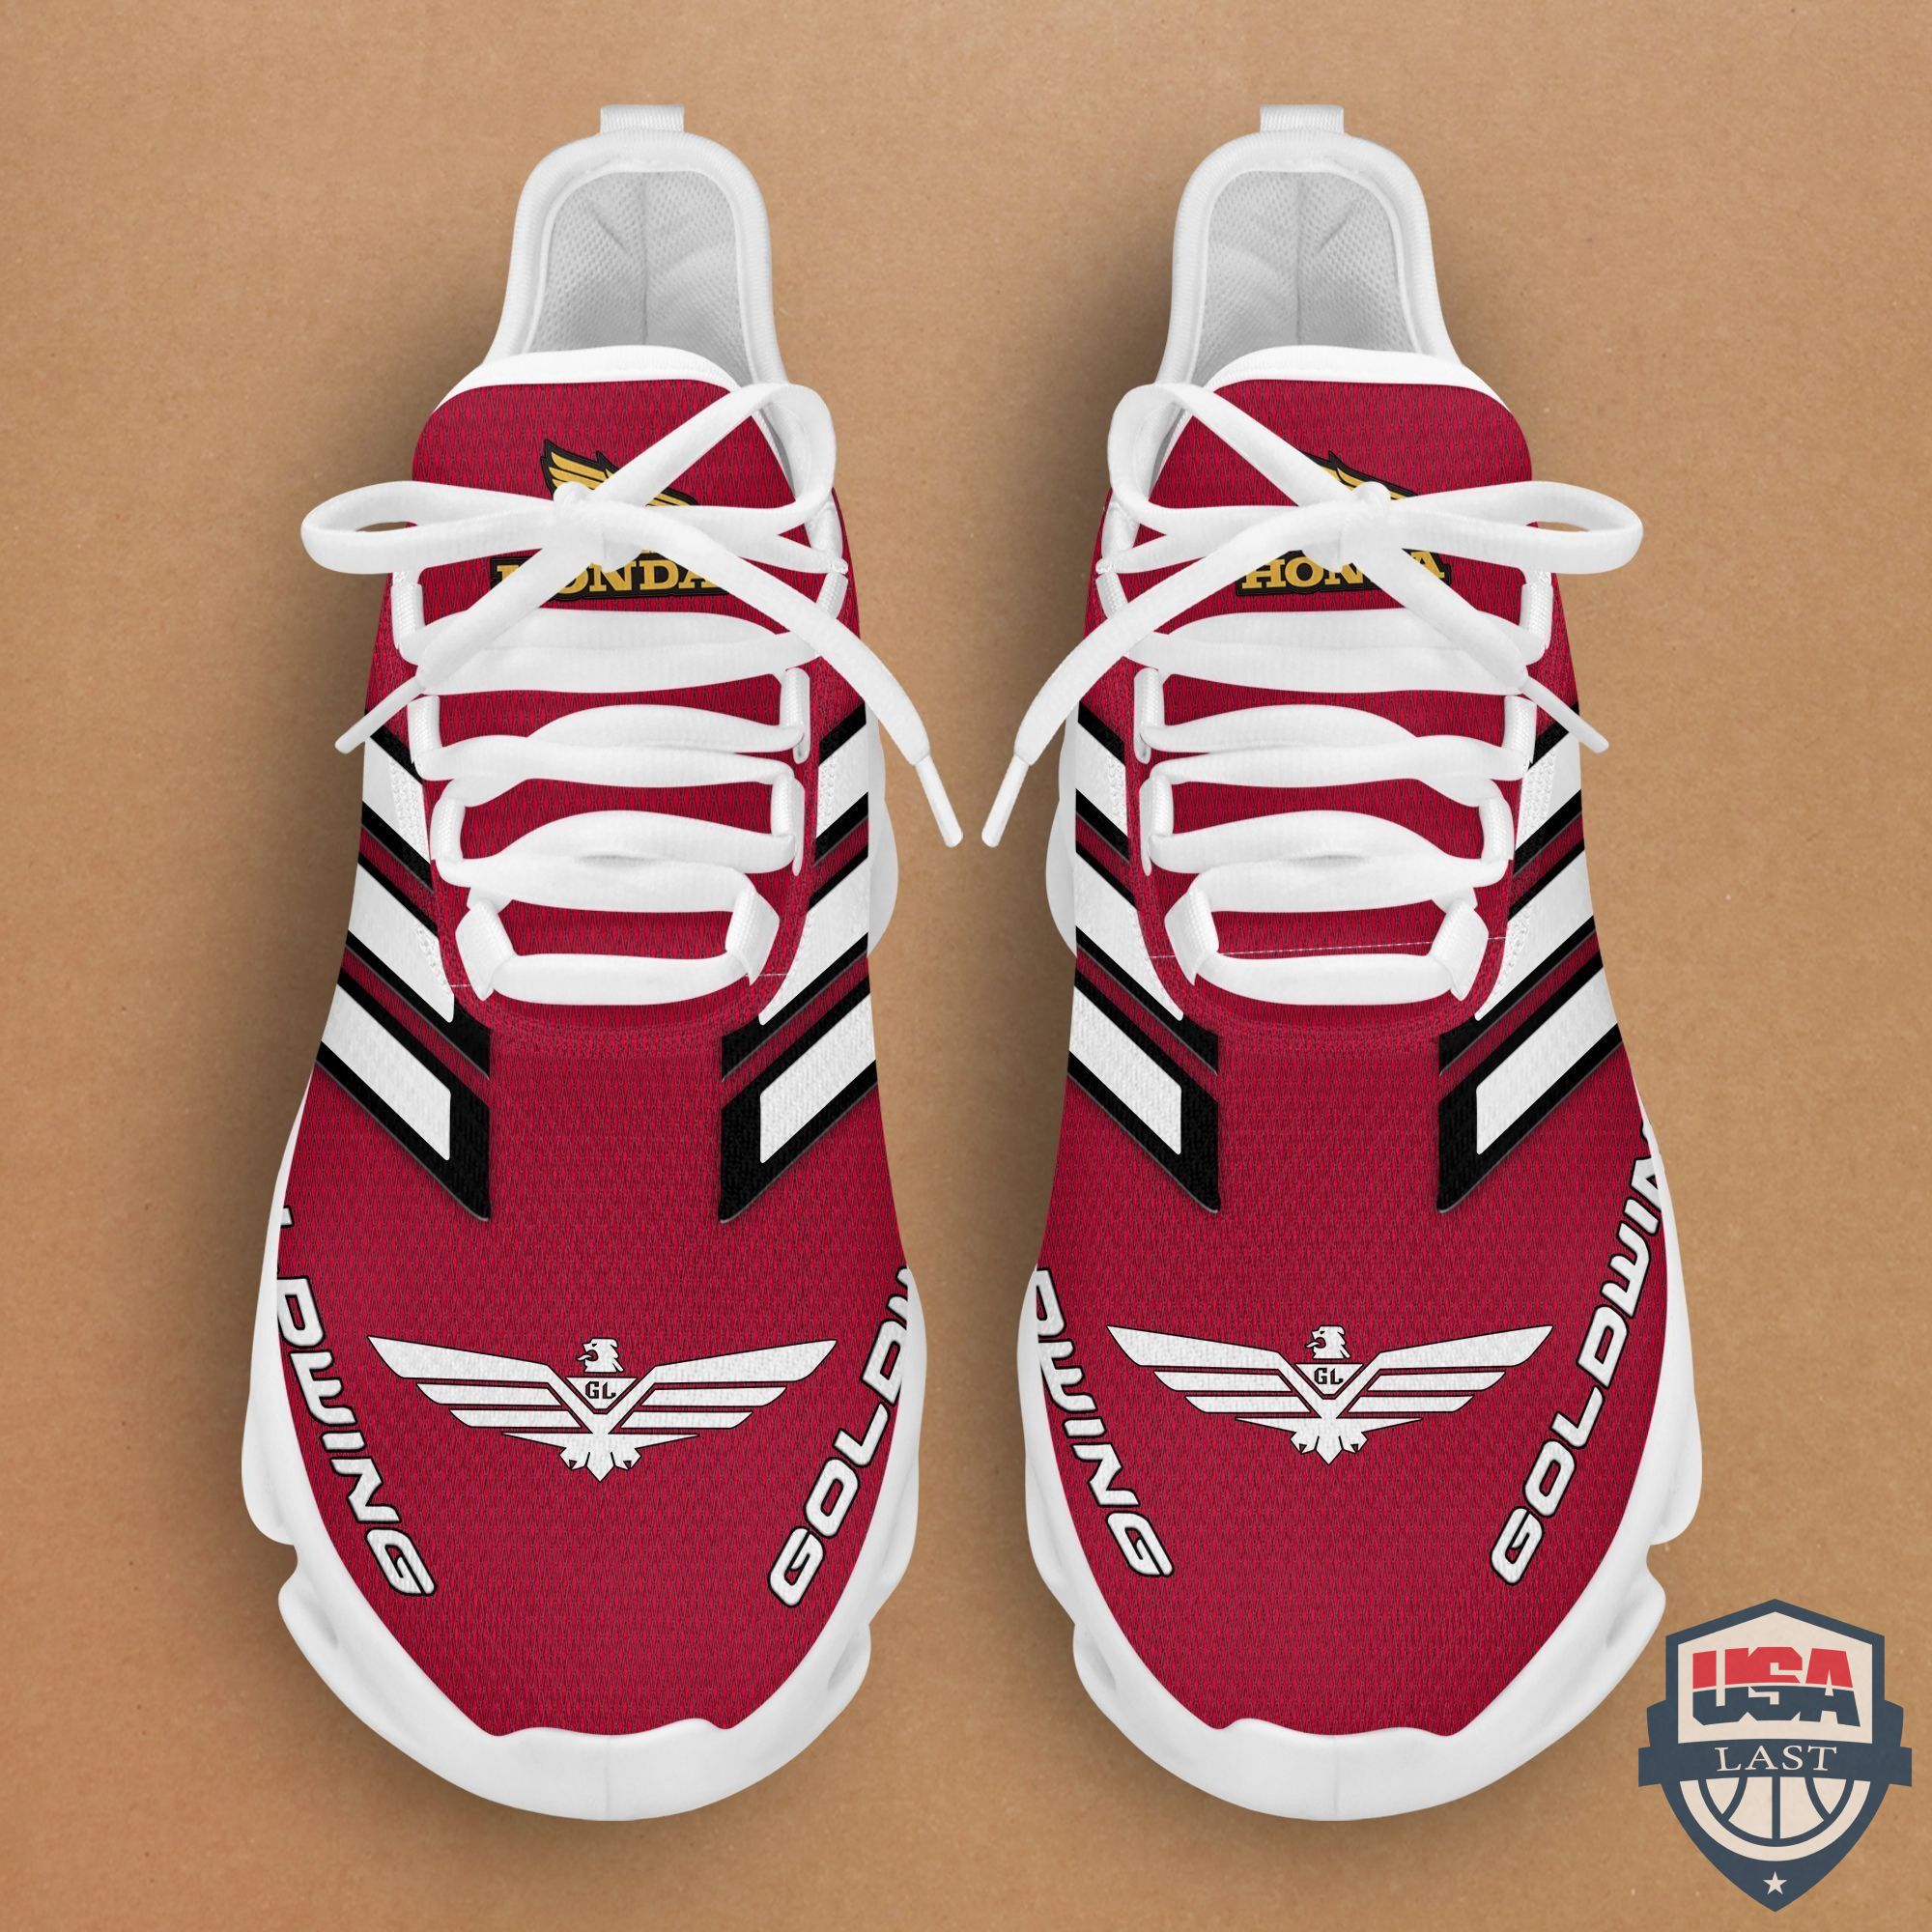 Honda Gold Wing Max Soul Sneaker Shoes Red Version